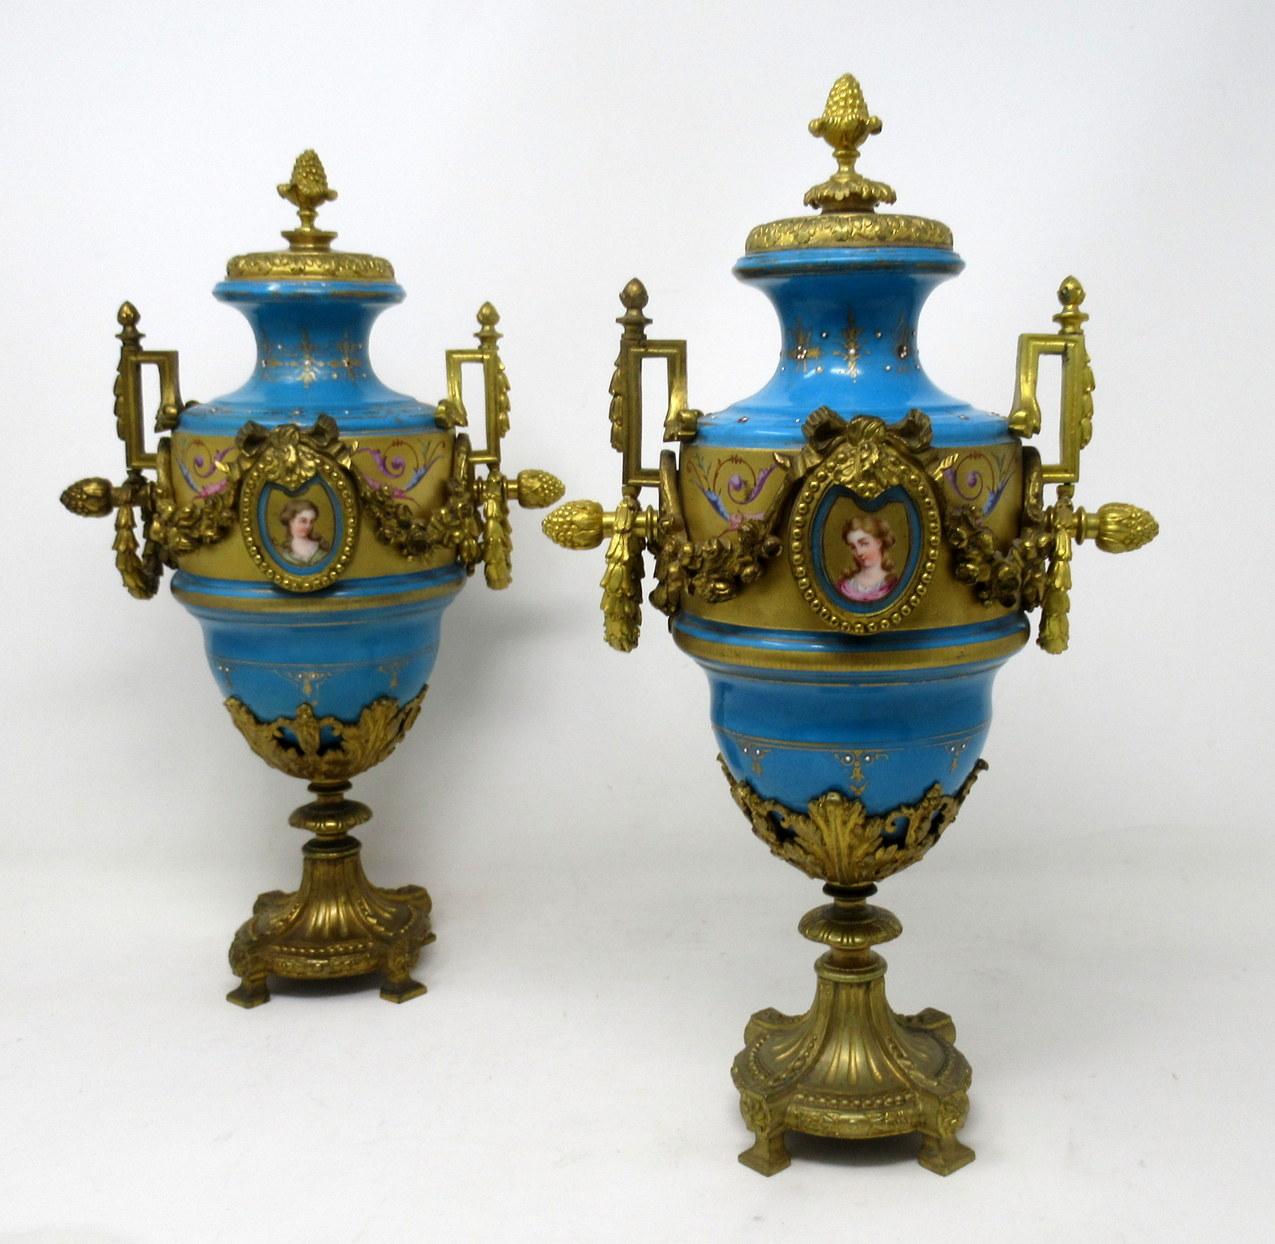 Stunning pair of French Sèvres soft paste hand decorated jeweled porcelain and ormolu table or mantel (fireplace) Urns with unusual decorative suspending husk gilt bronze handles of traditional form and of outstanding quality, made during the last